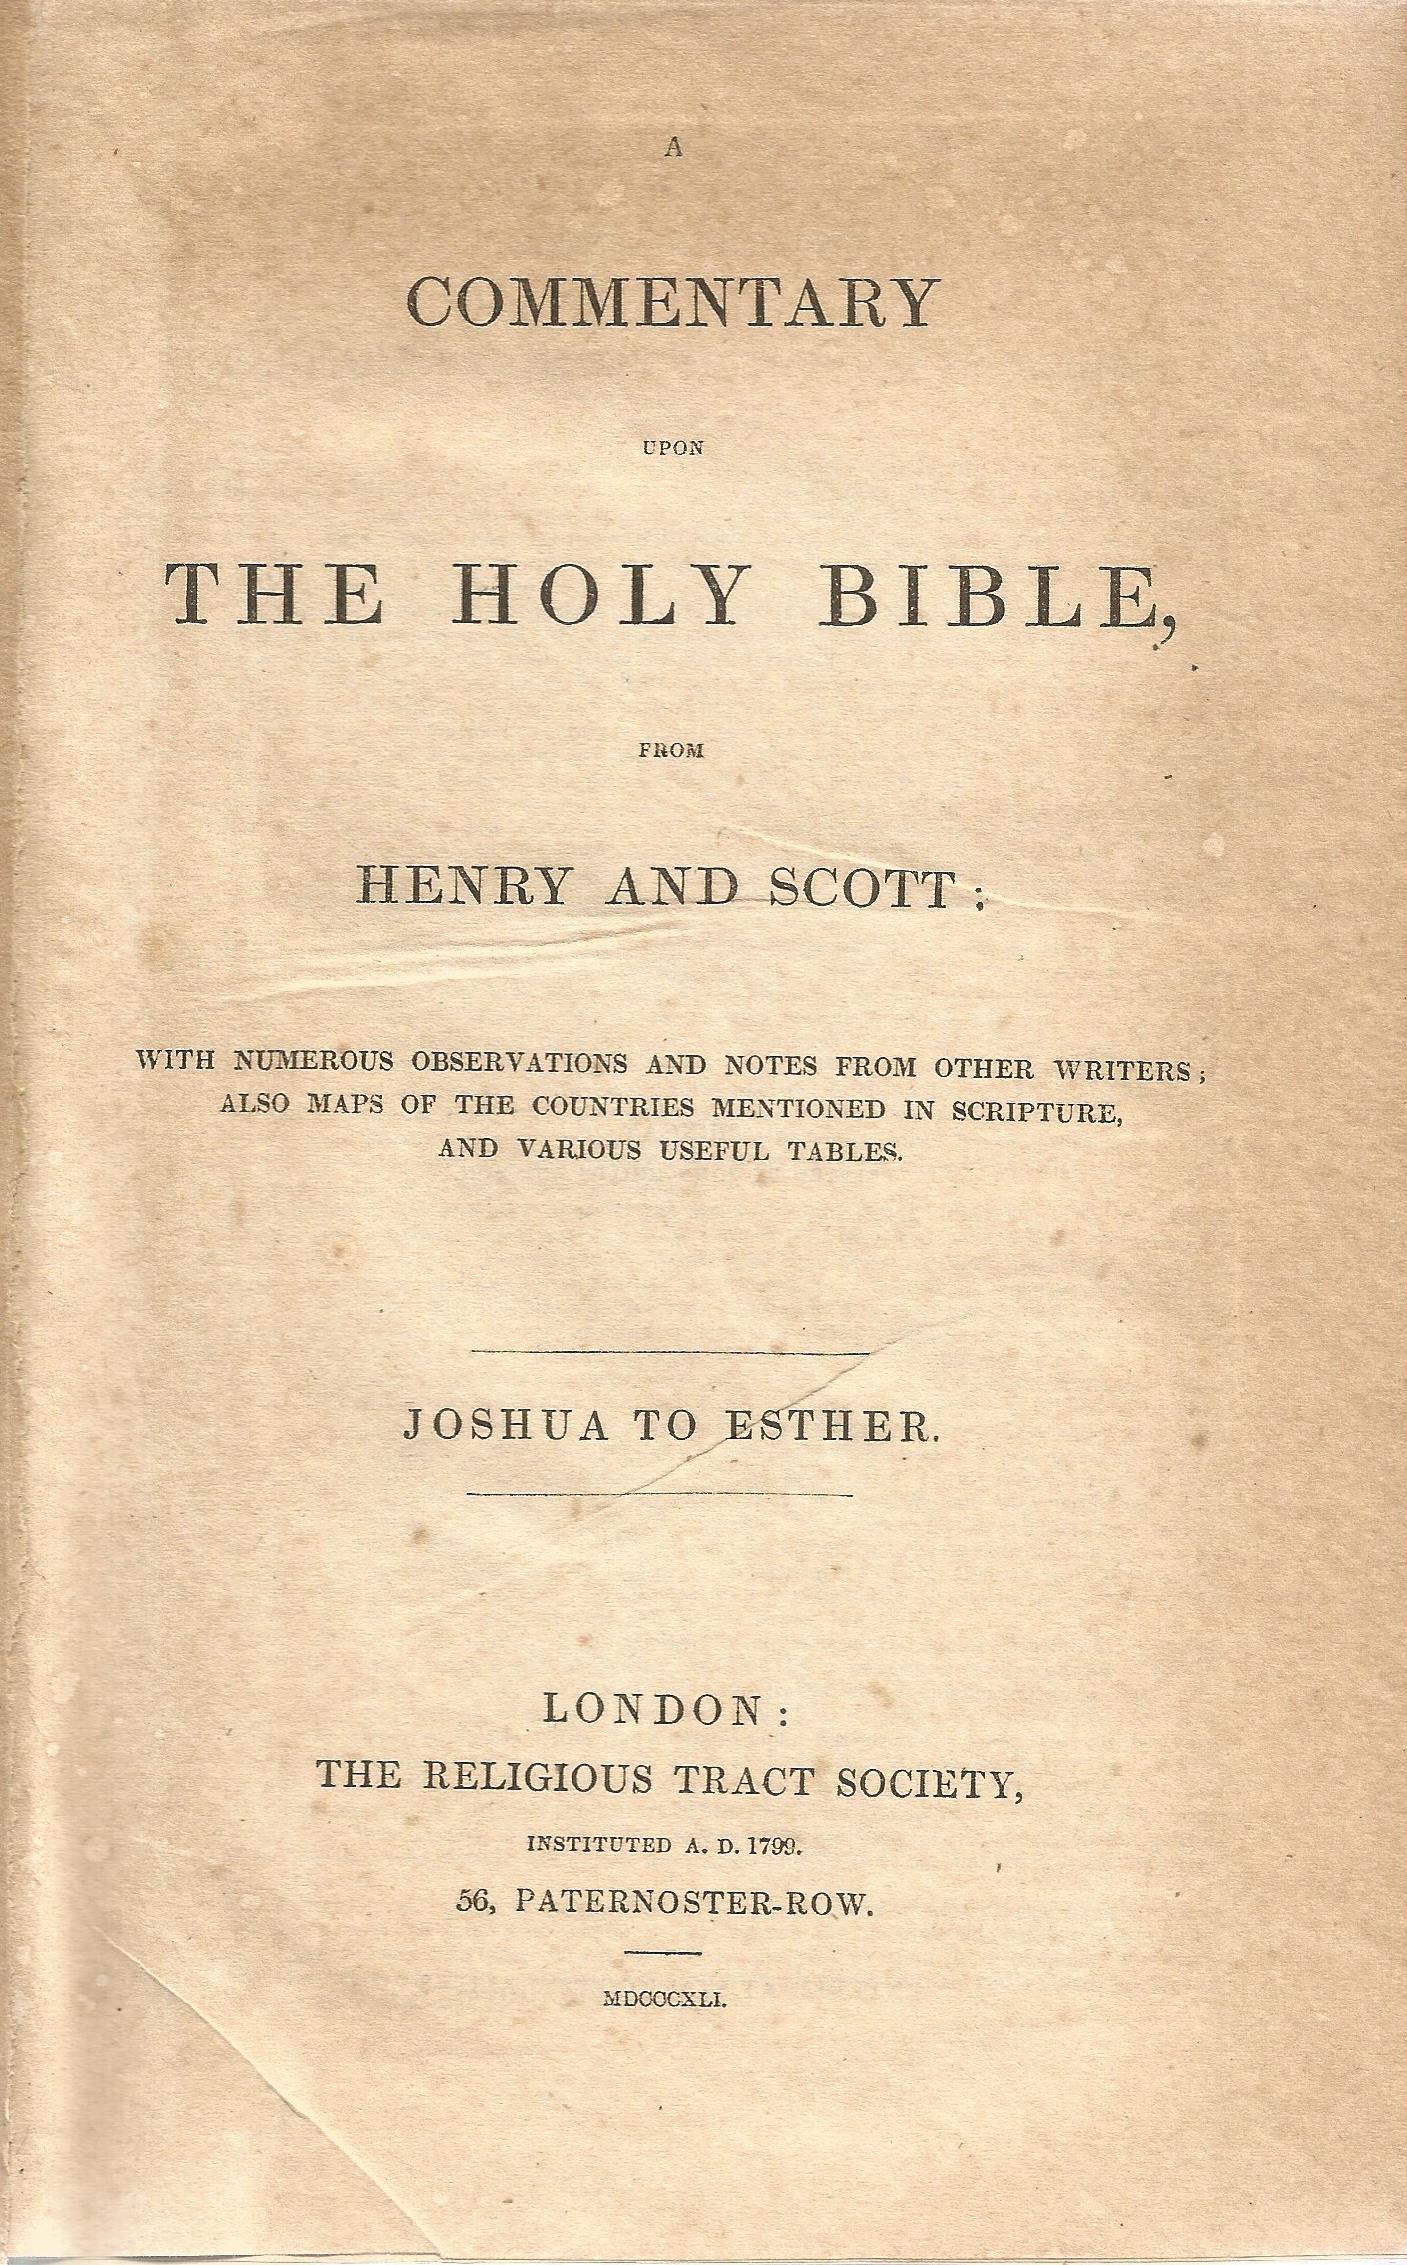 A Commentary from The Holy Bible Joshua to Esther from Henry and Scott 1841 published by The - Image 2 of 2